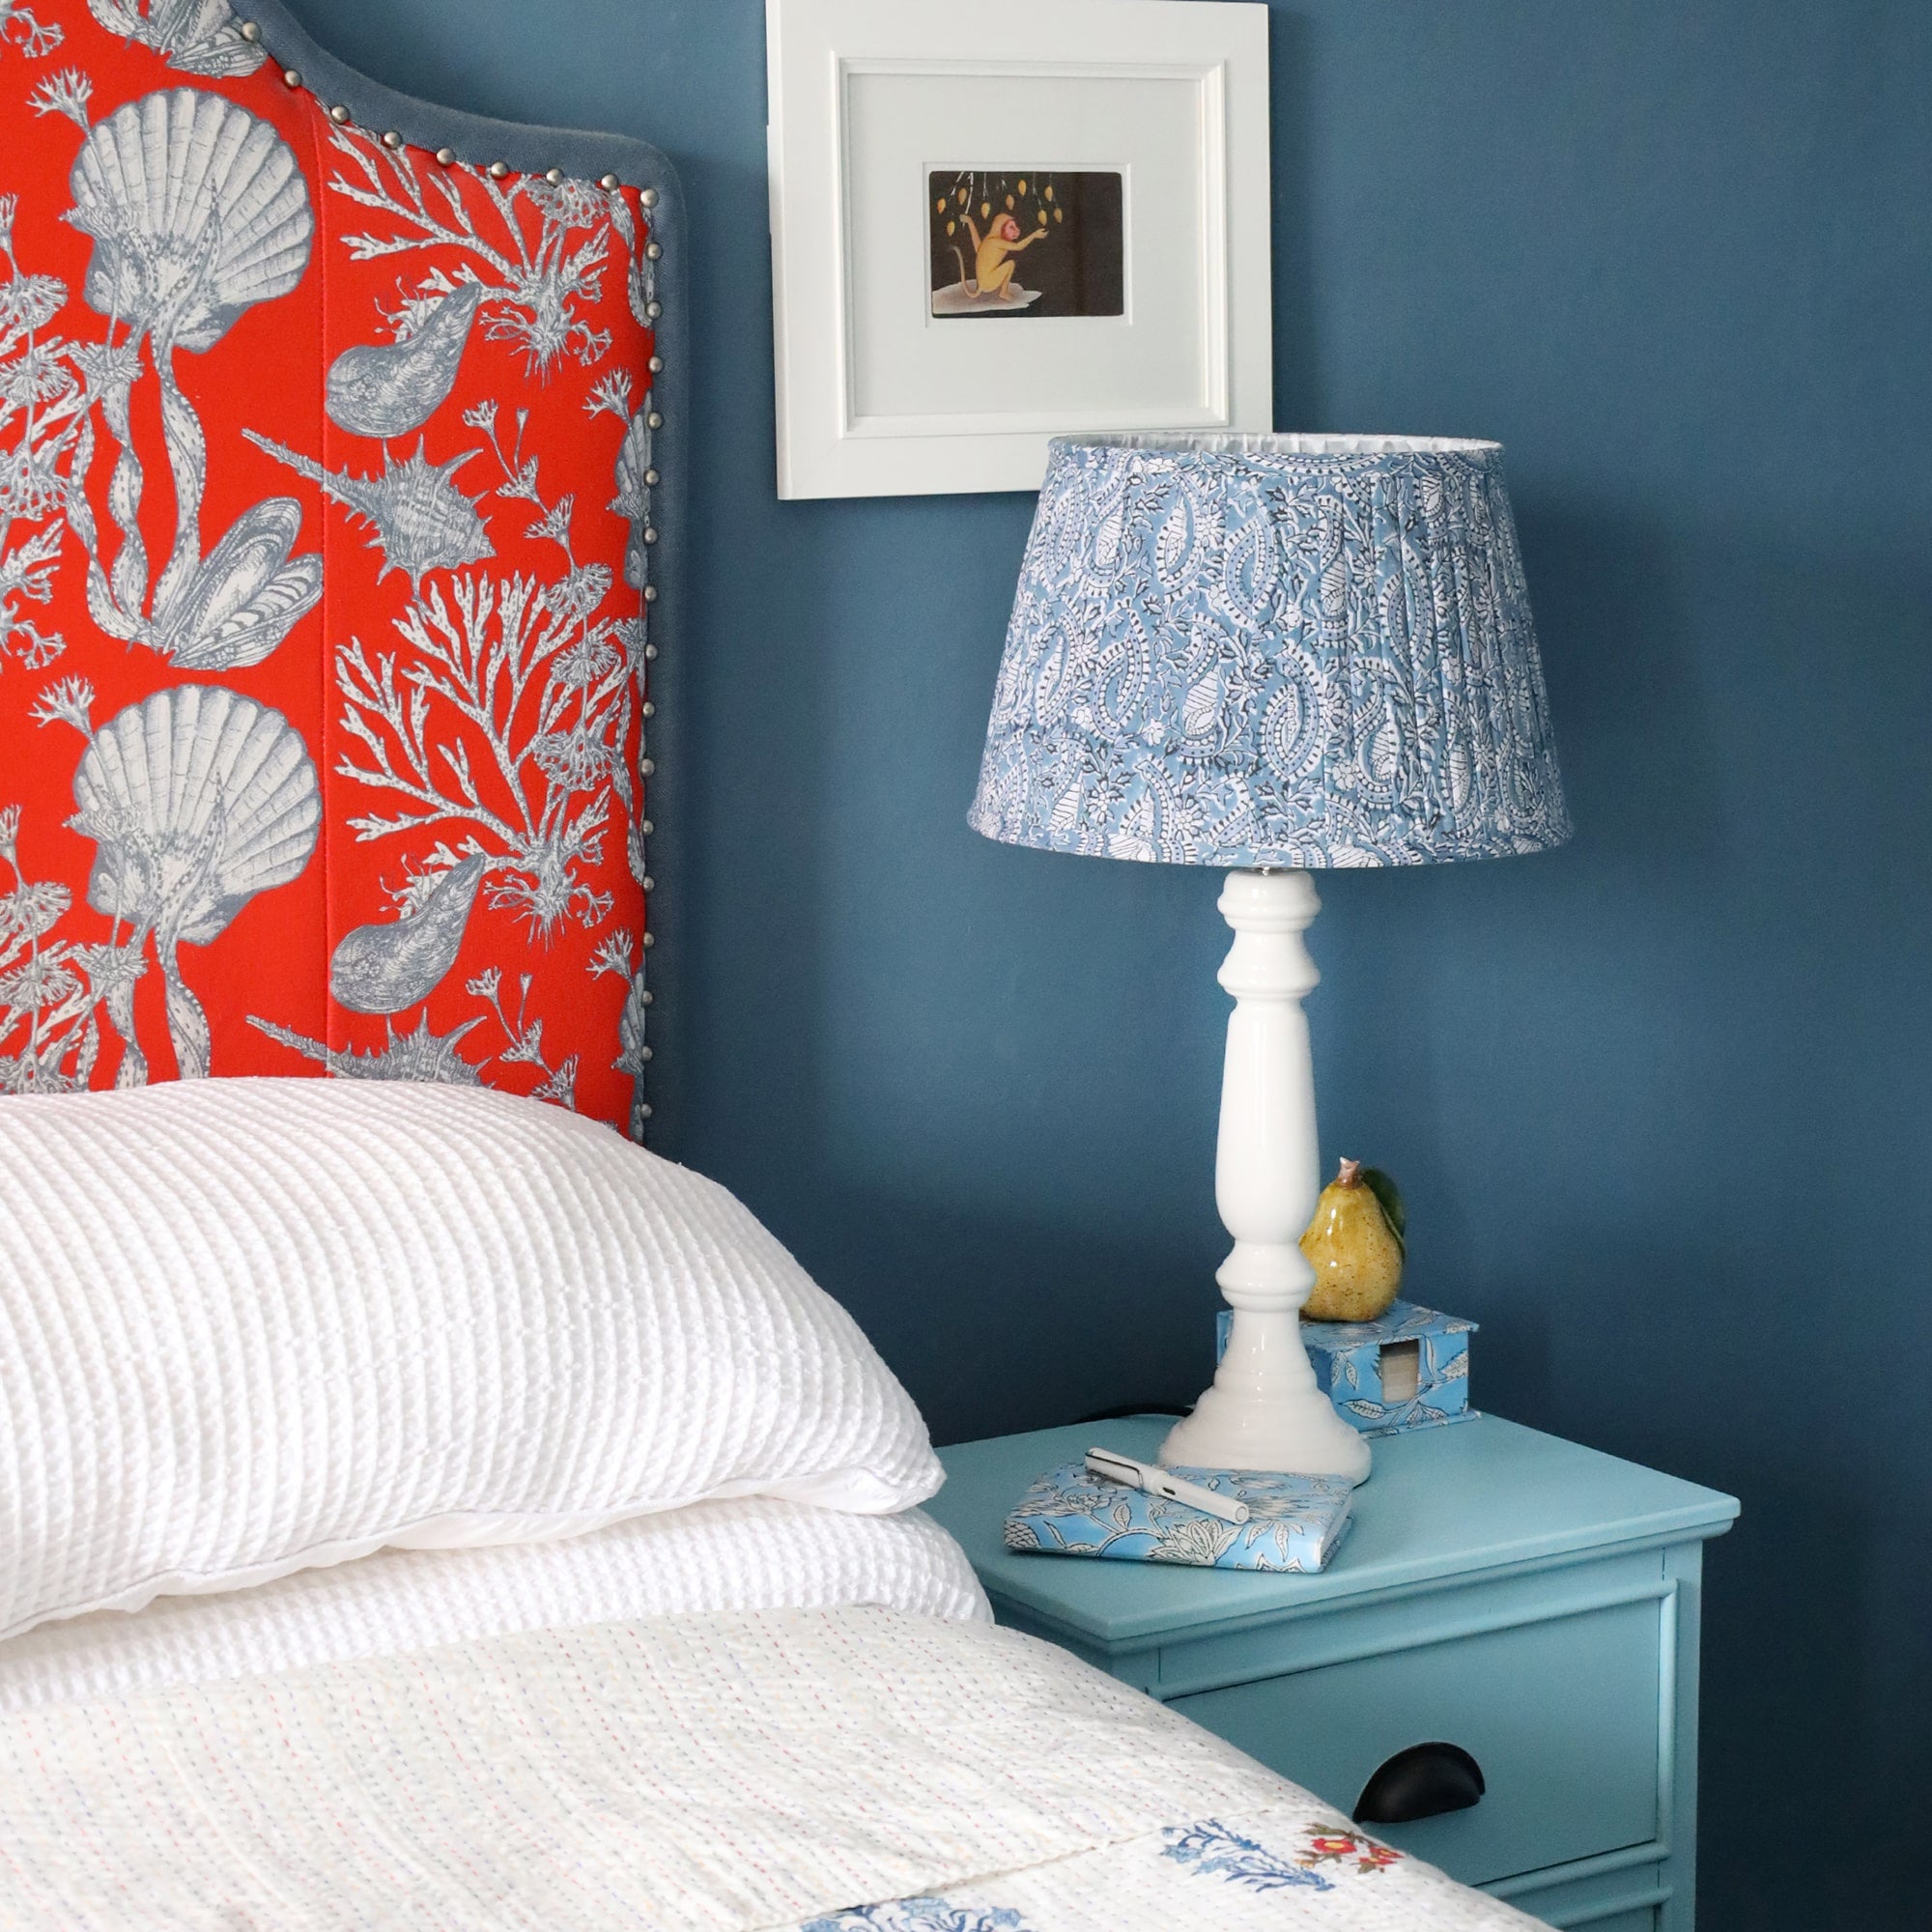 Azure Paisley Shell pleated lampshade with a white lampbase,on a bedside cabinet with a notebook and pen.In the background is the headboard which is red with white shells and a white picture on the wall.